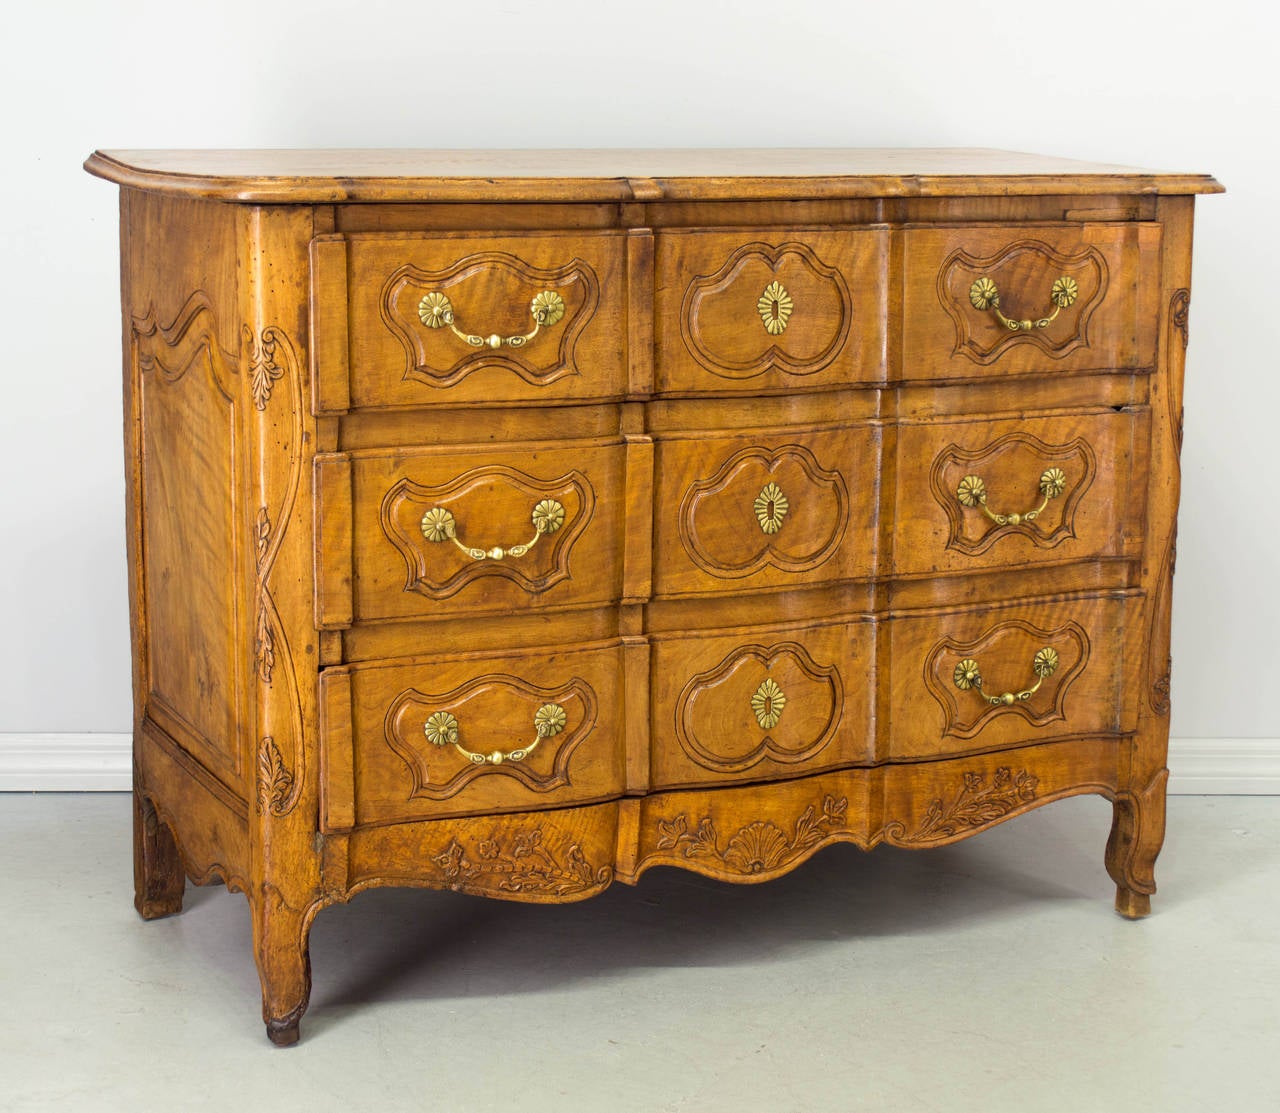 18th century French Louis XV style commode with an arbalete front, or crossbow front made of blond walnut with nice honey color. Top is made from a single plank of wood. Carved details on the apron and front curved corners. Three dovetailed drawers